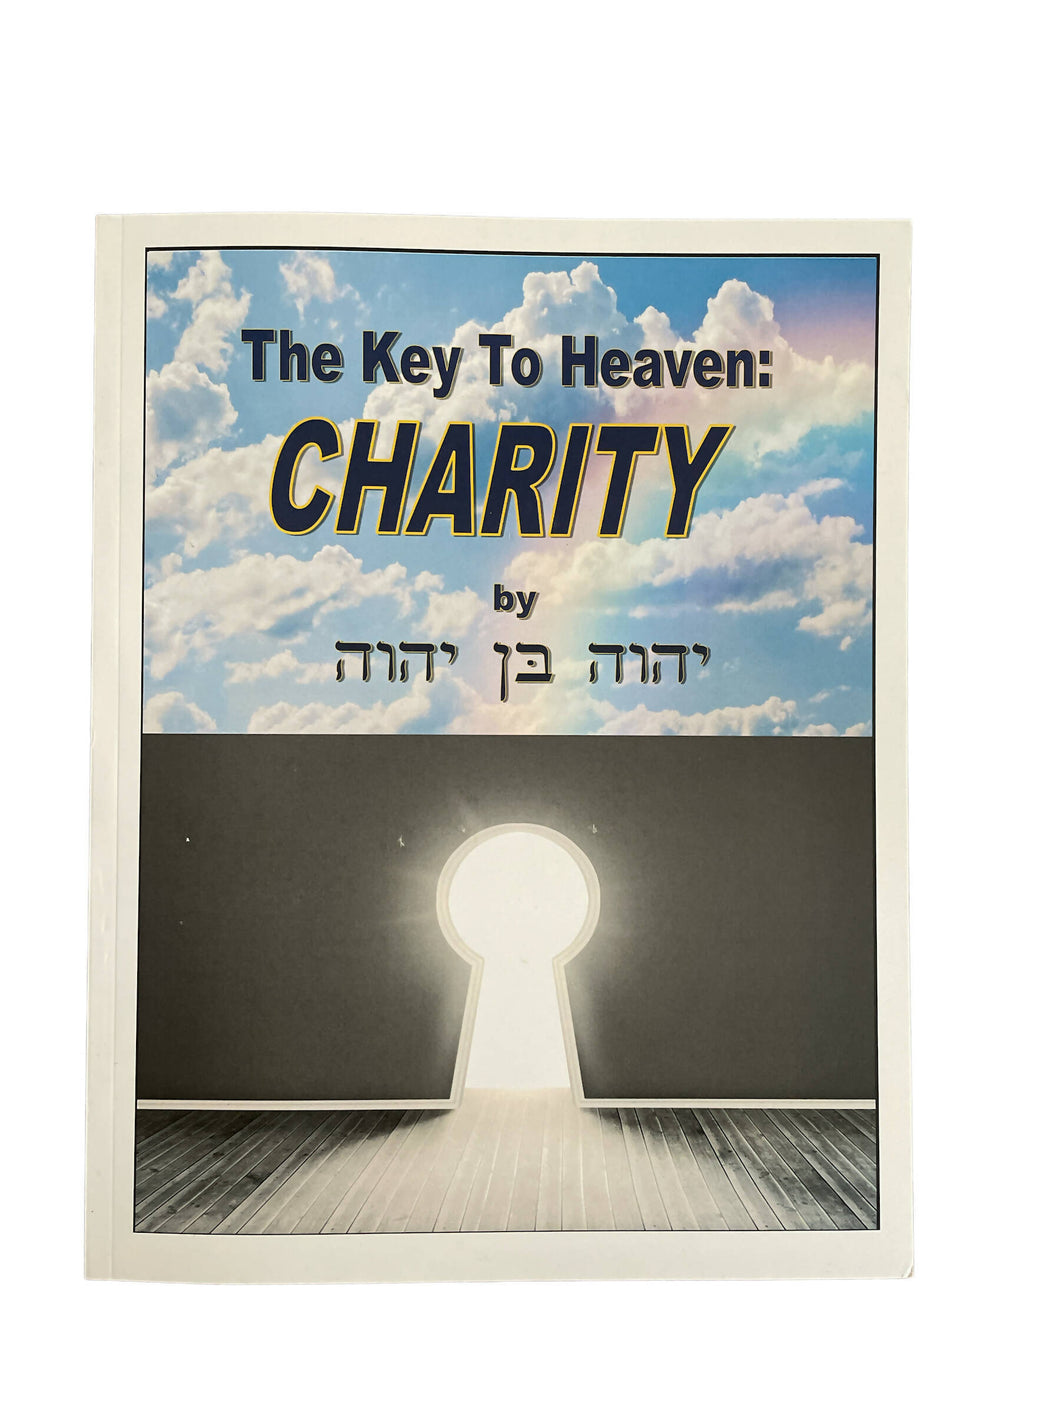 The Key To Heaven: Charity